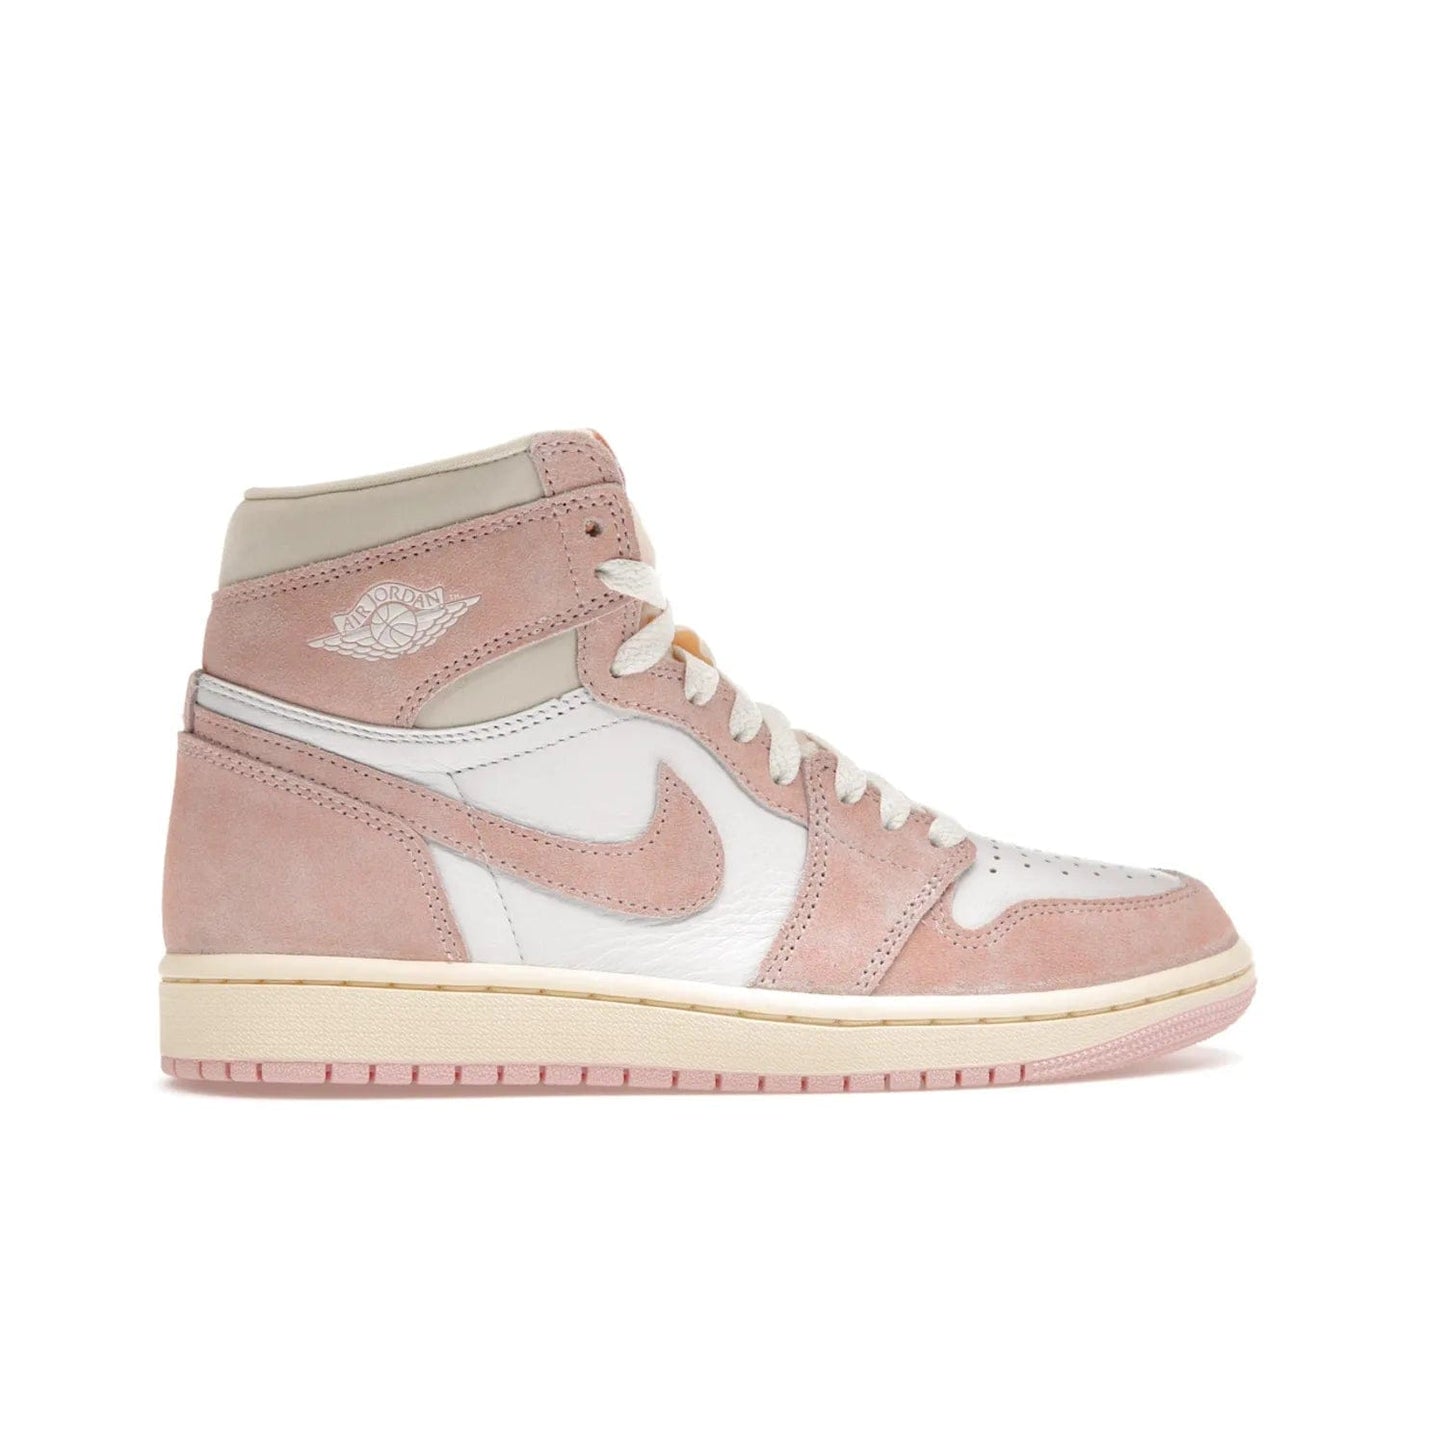 Jordan 1 Retro High OG Washed Pink (Women's) - Image 36 - Only at www.BallersClubKickz.com - Iconic Air Jordan 1 Retro High OG for women with unique pink suede and white leather uppers. Get the timeless look on April 22, 2023.